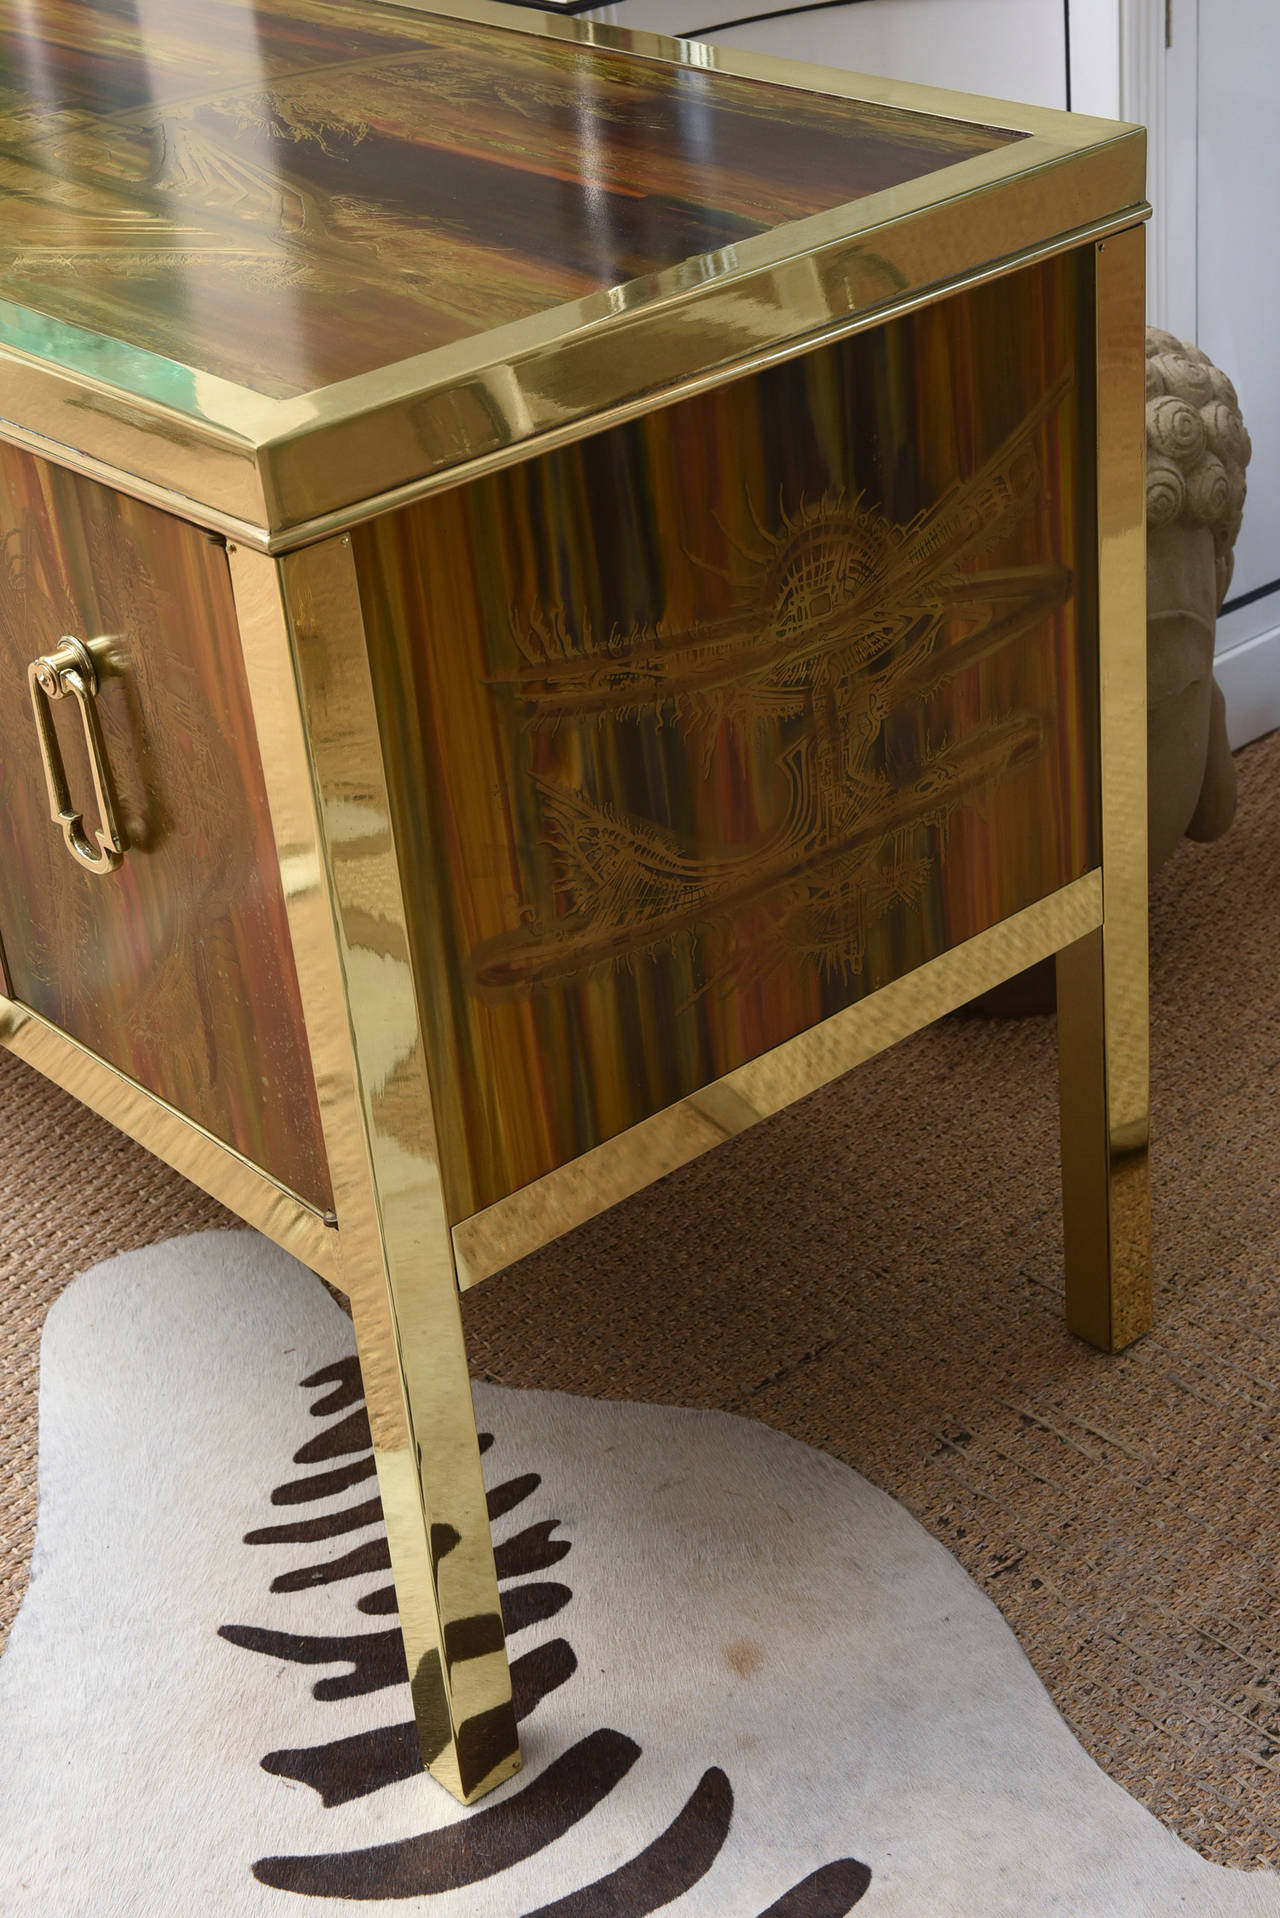 This exquisite Bernard Rohne masterpiece is art and sculpture all in one as a cabinet, as a console or buffet. It is an acid etched abstract design; every cabinet is different as it is all hand done. The solid brass original handles and frame have